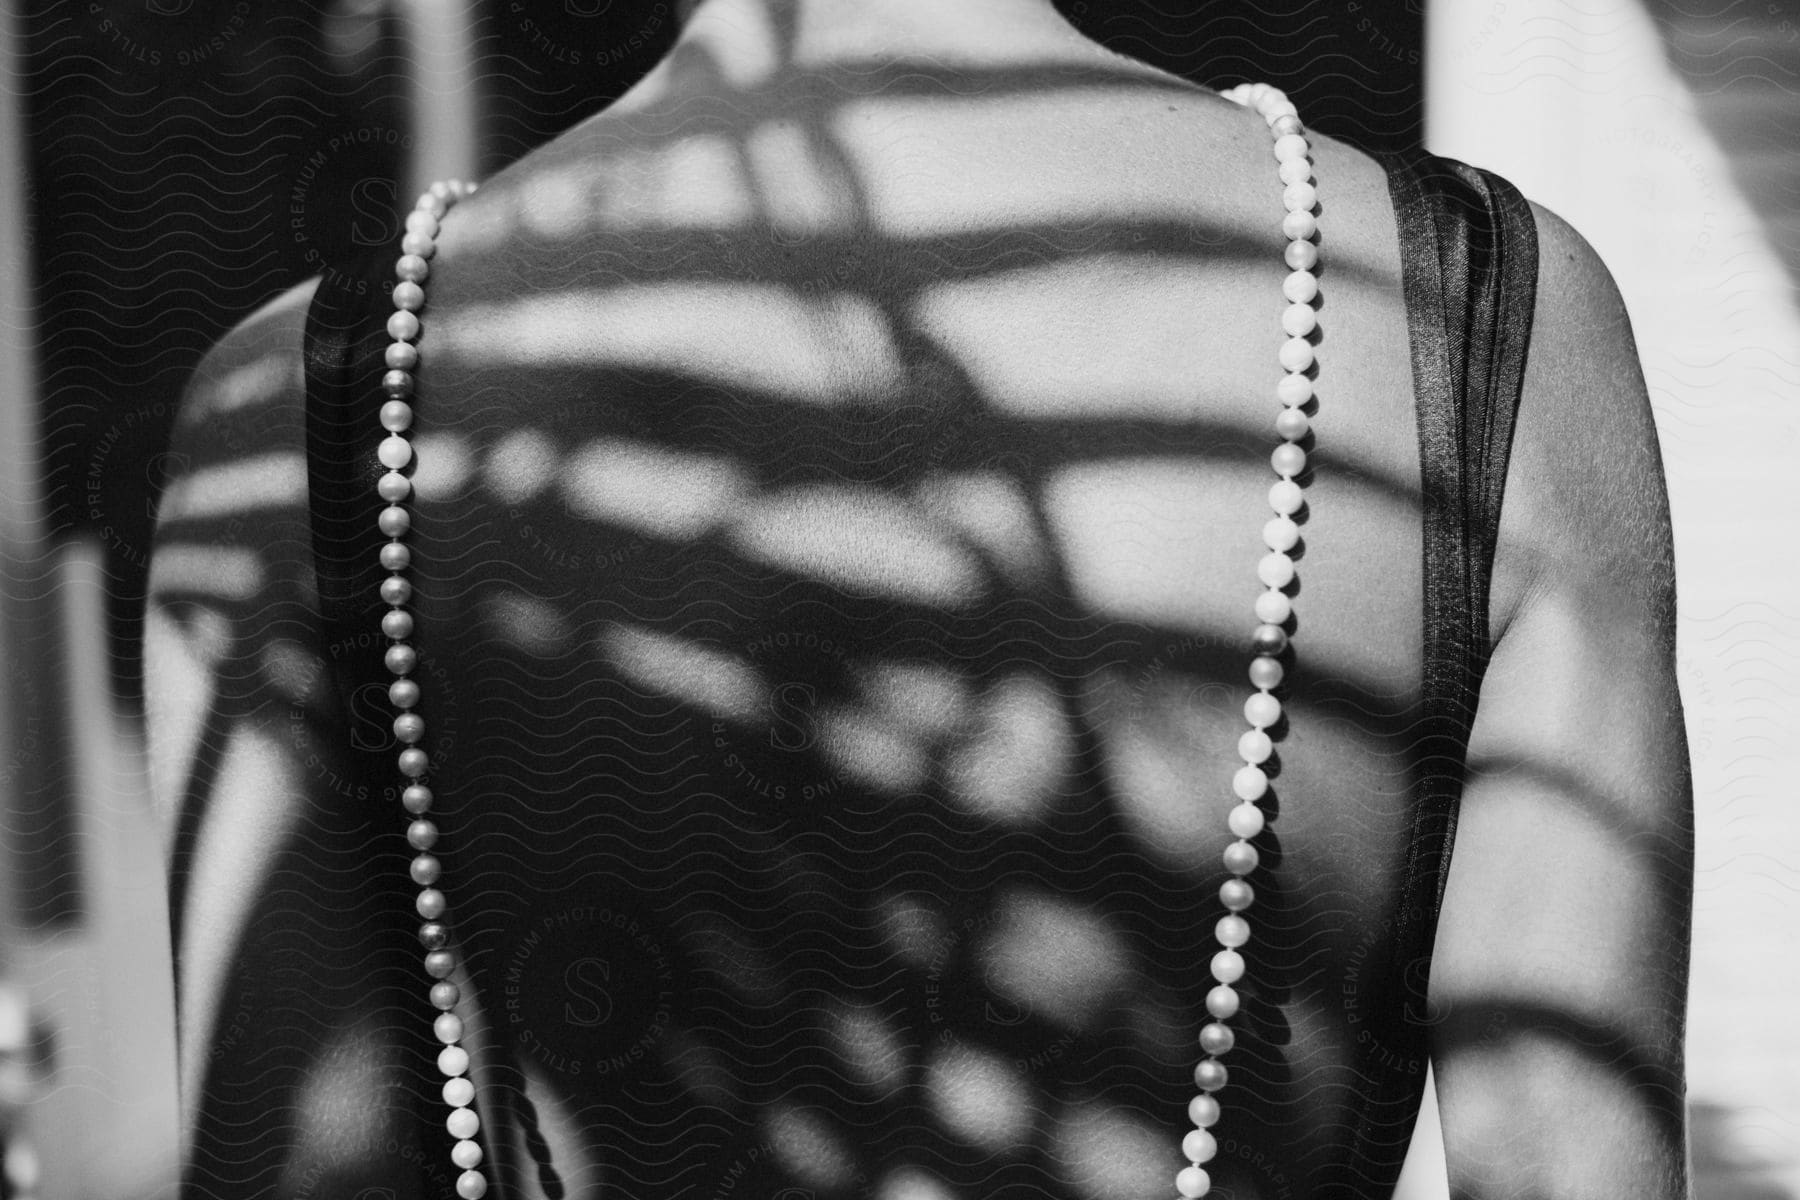 A womans back wearing a backless dress and a necklace reaching her waist